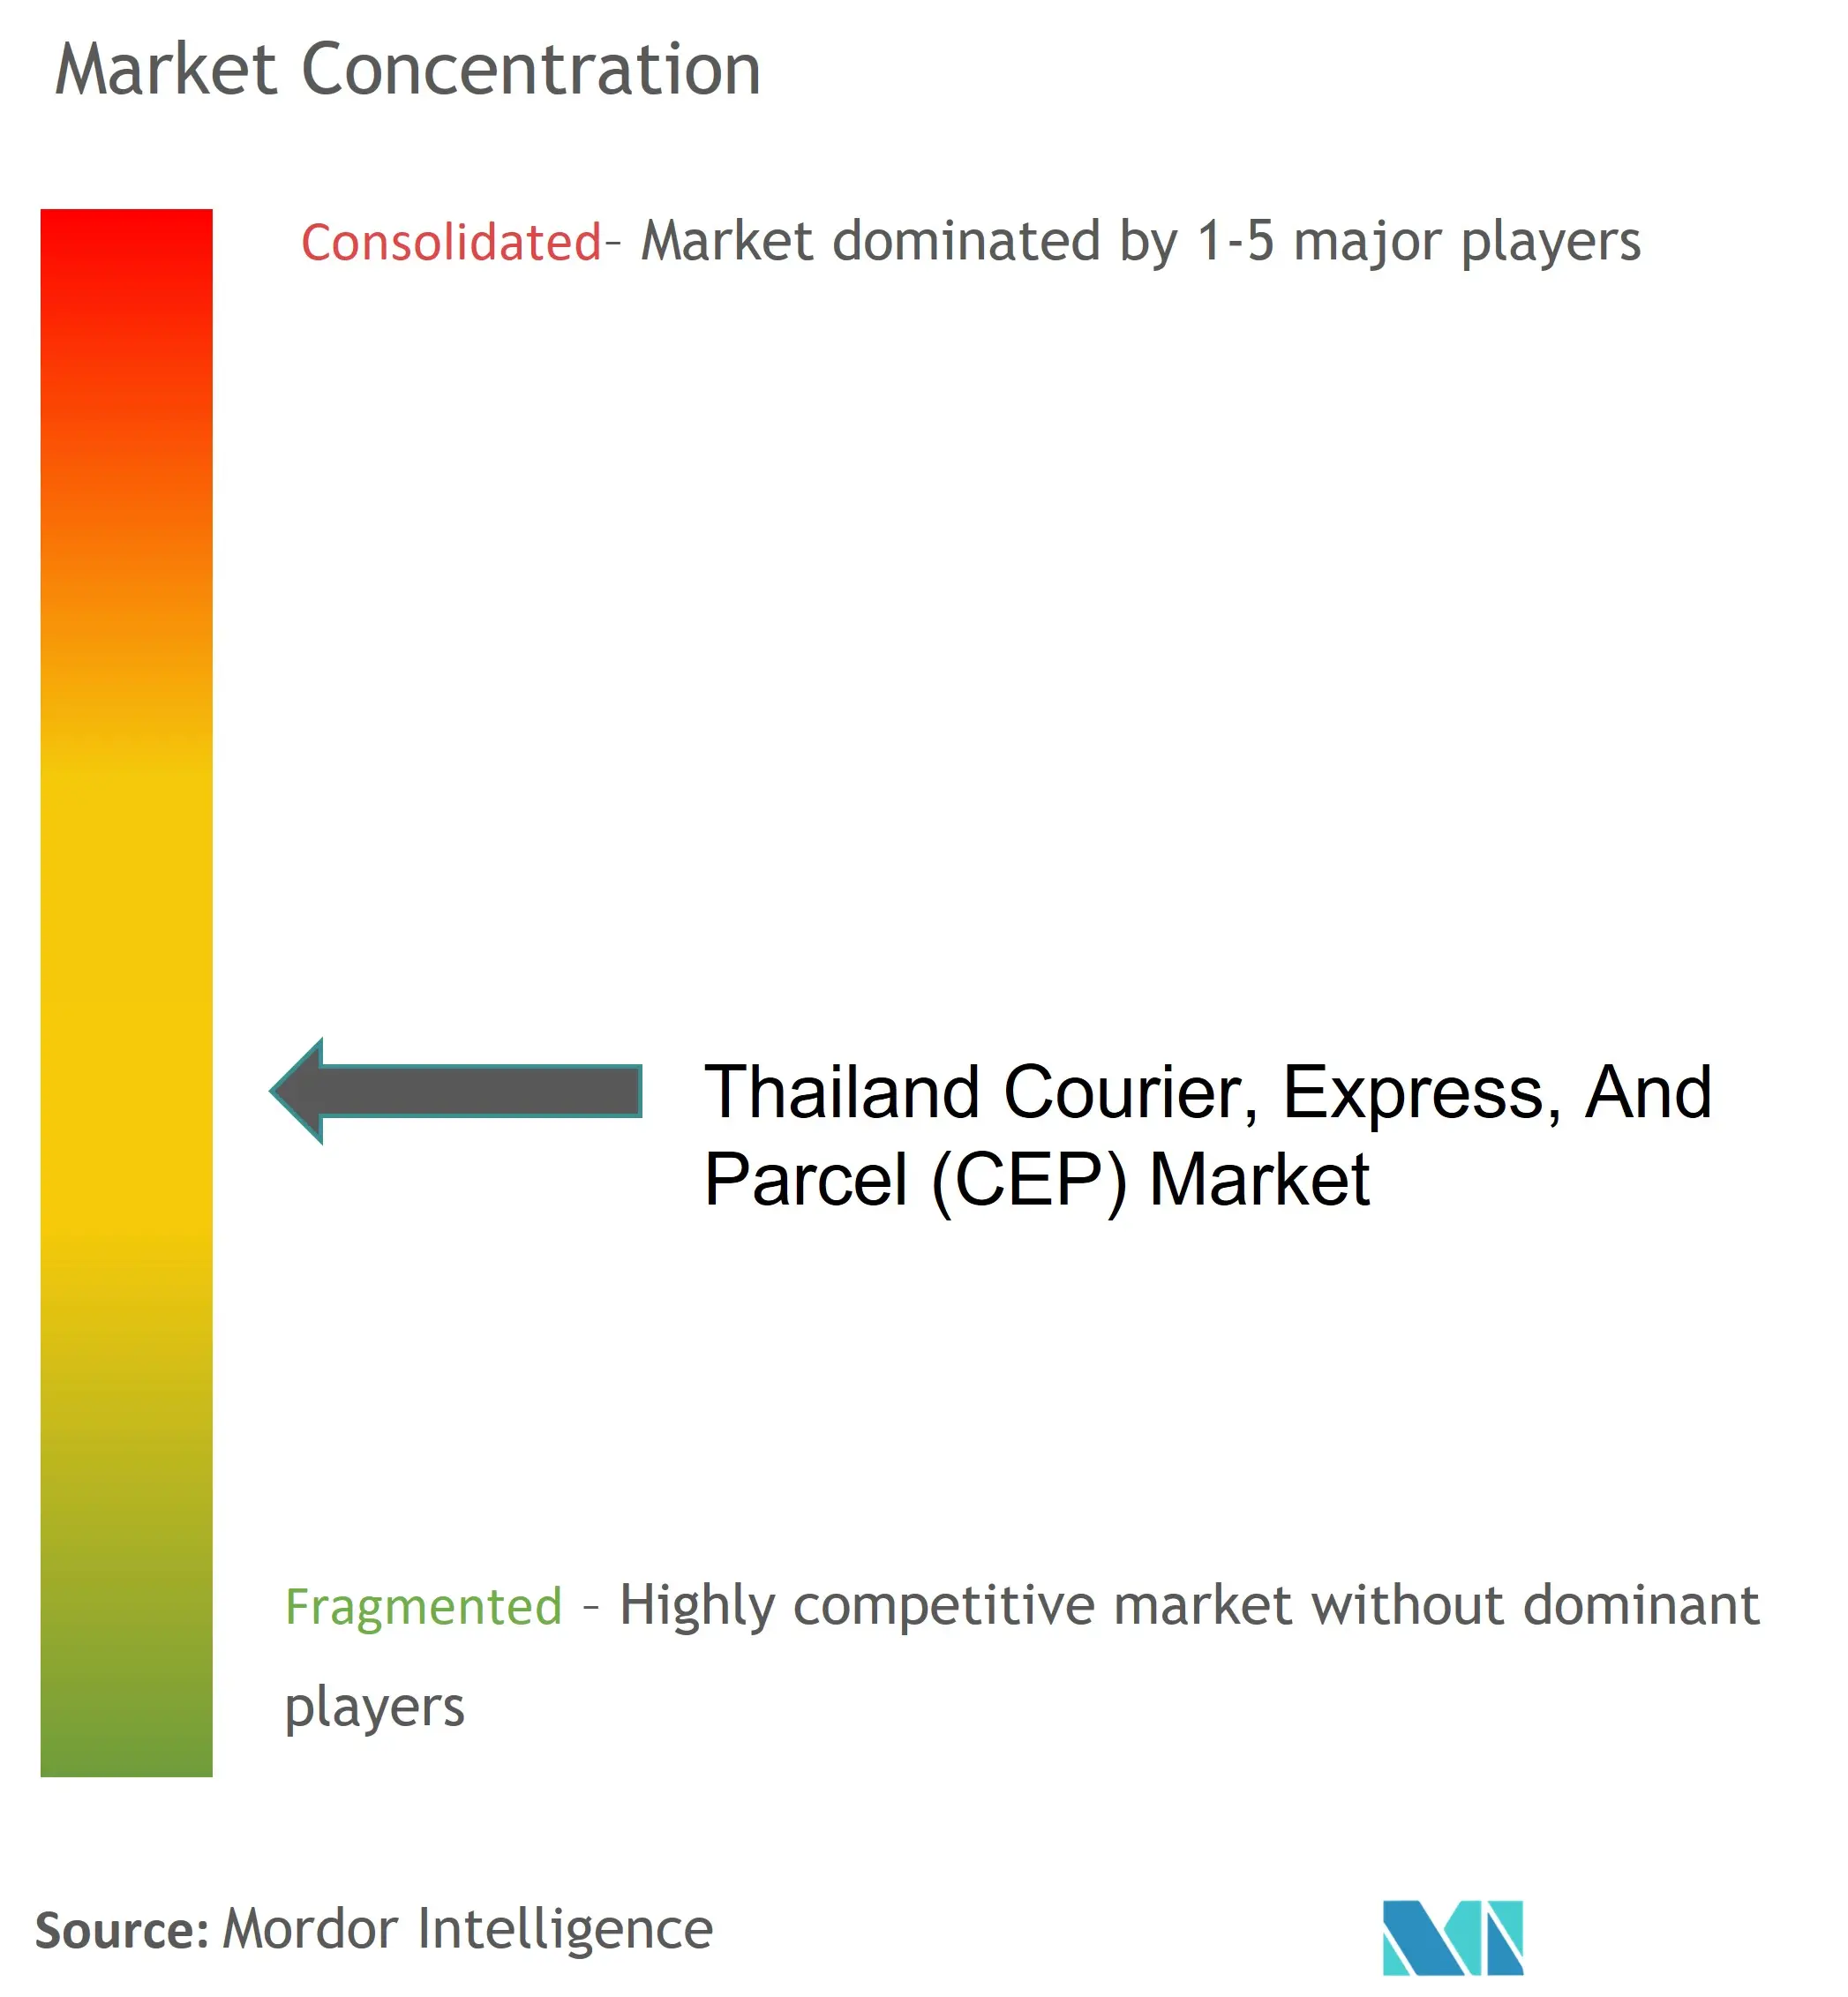 Thailand Courier, Express, And Parcel (CEP) Market Concentration